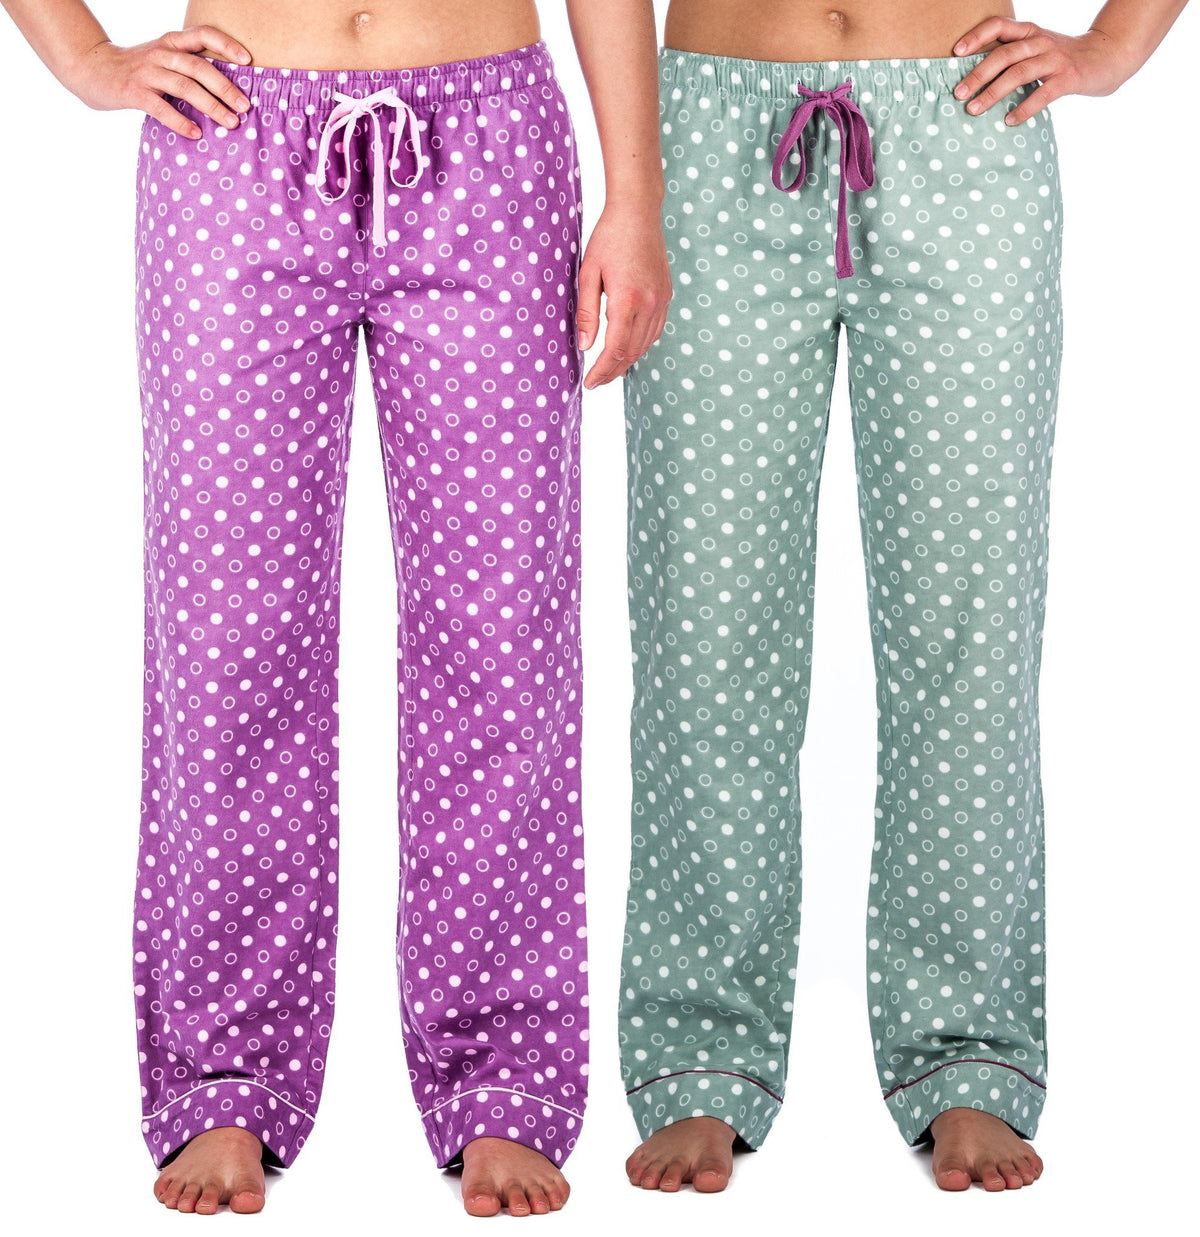 Women's 100% Cotton Flannel Lounge Pants (2-Pack) - Relaxed Fit - Polka Purple/Green